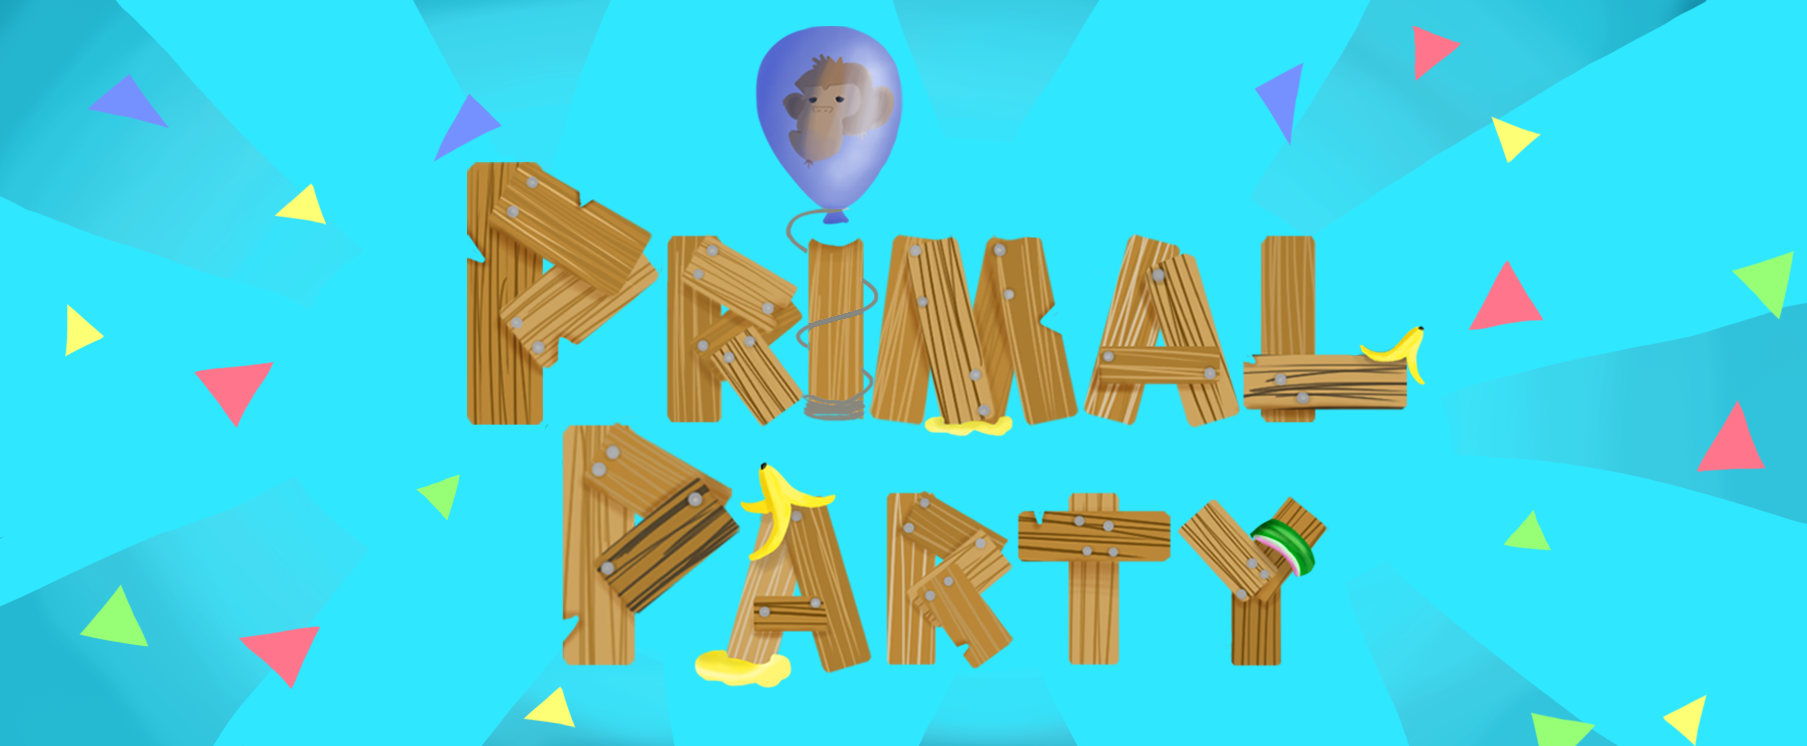 Primal Party